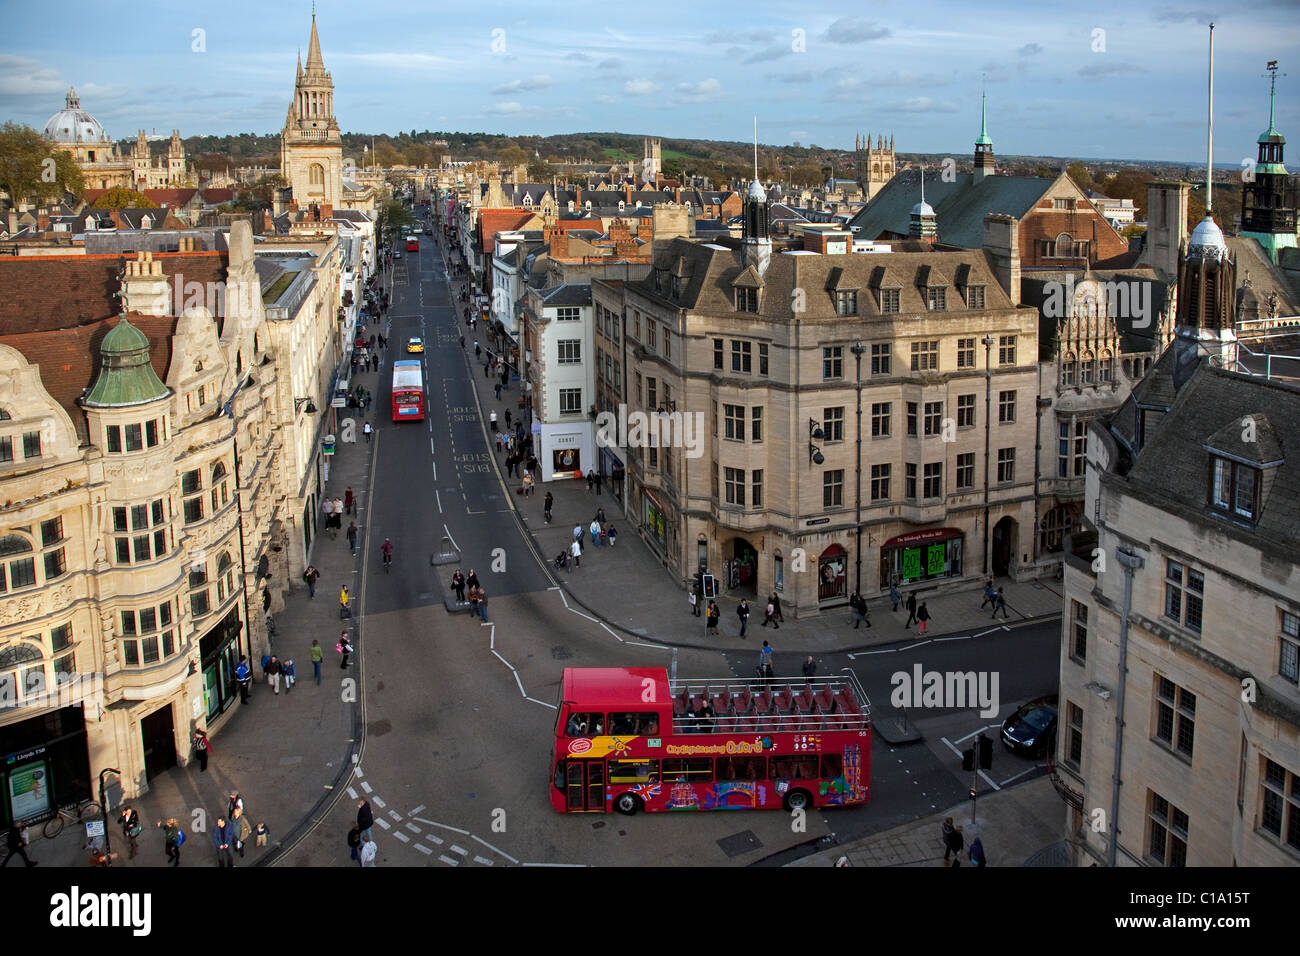 View over High Street in Oxford city, Oxfordshire, England, UK Stock Photo